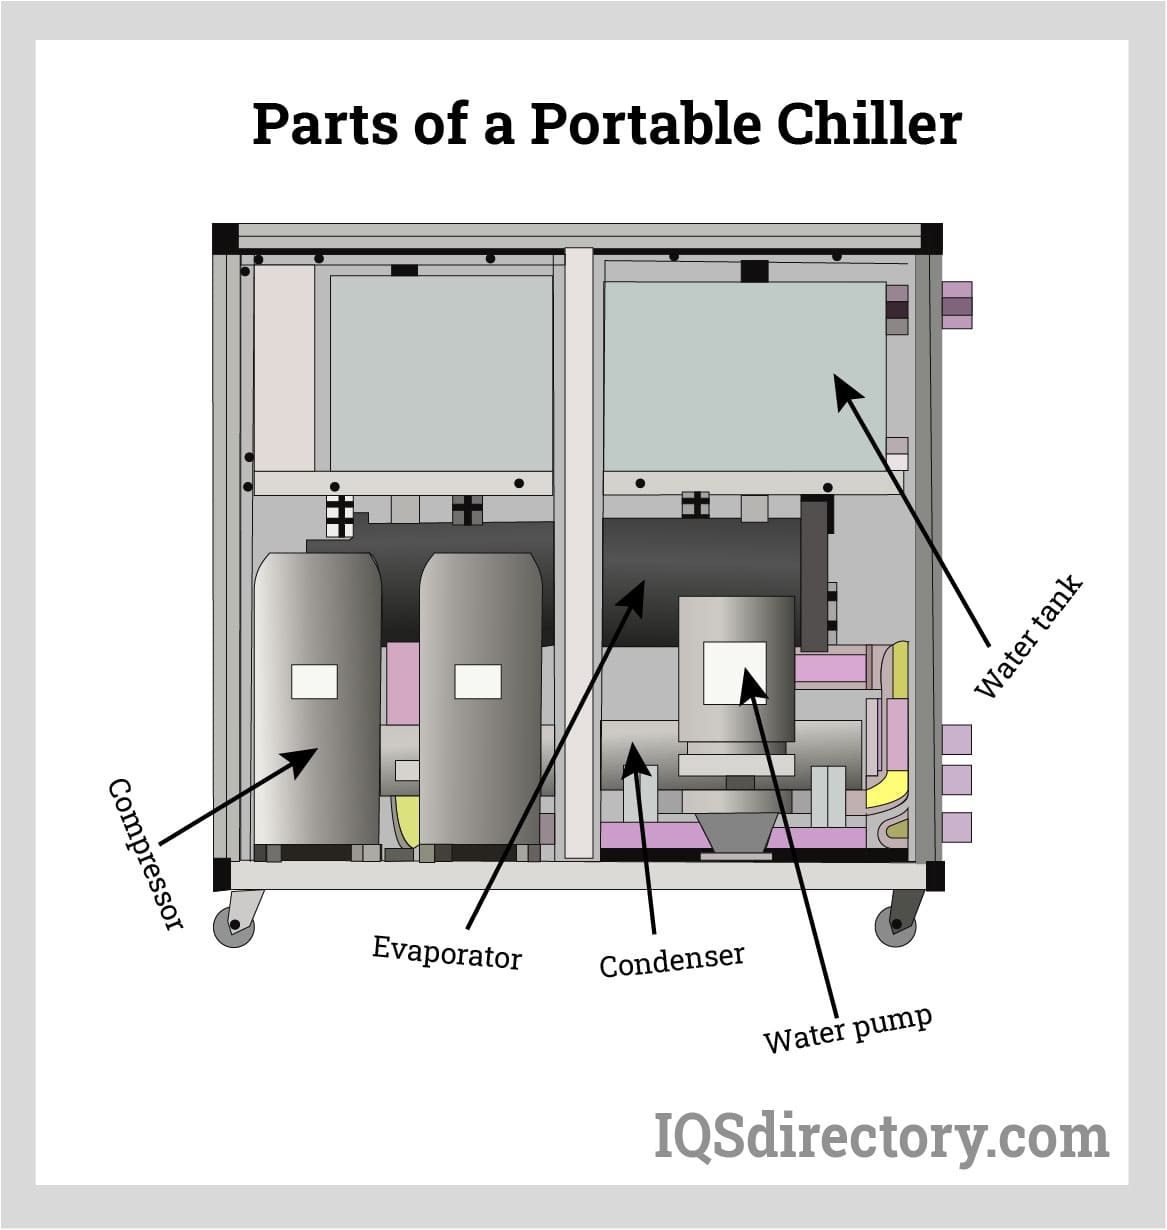 Parts of a Portable Chiller